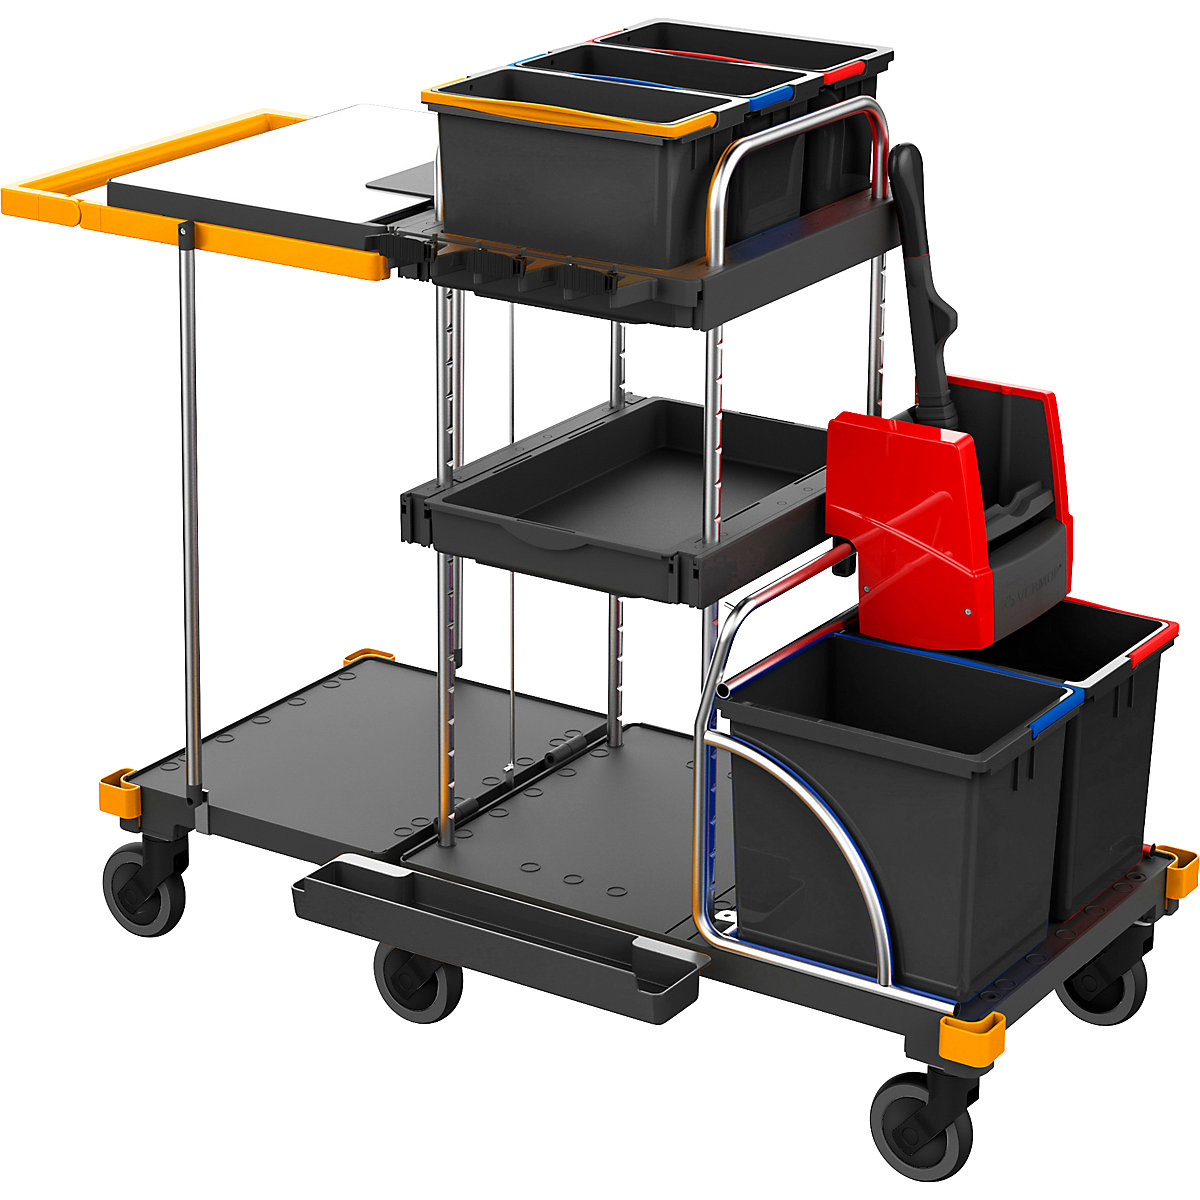 EQUIPE cleaning trolley – Vermop